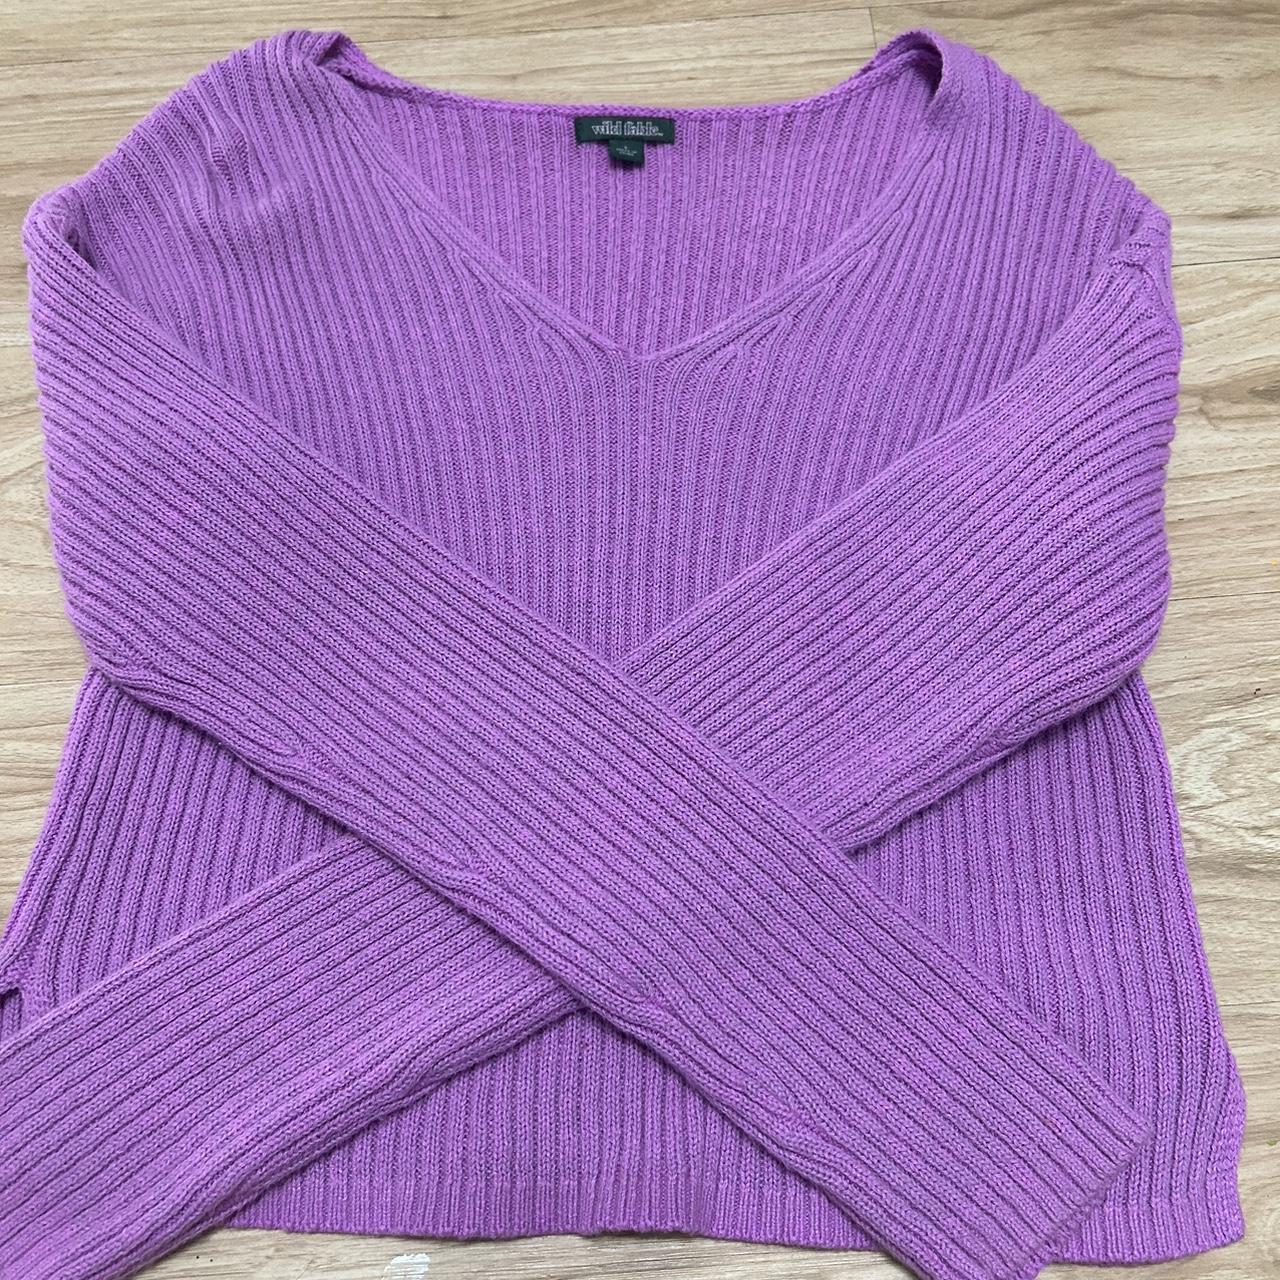 Wild Fable purple sweater love this color! - Depop